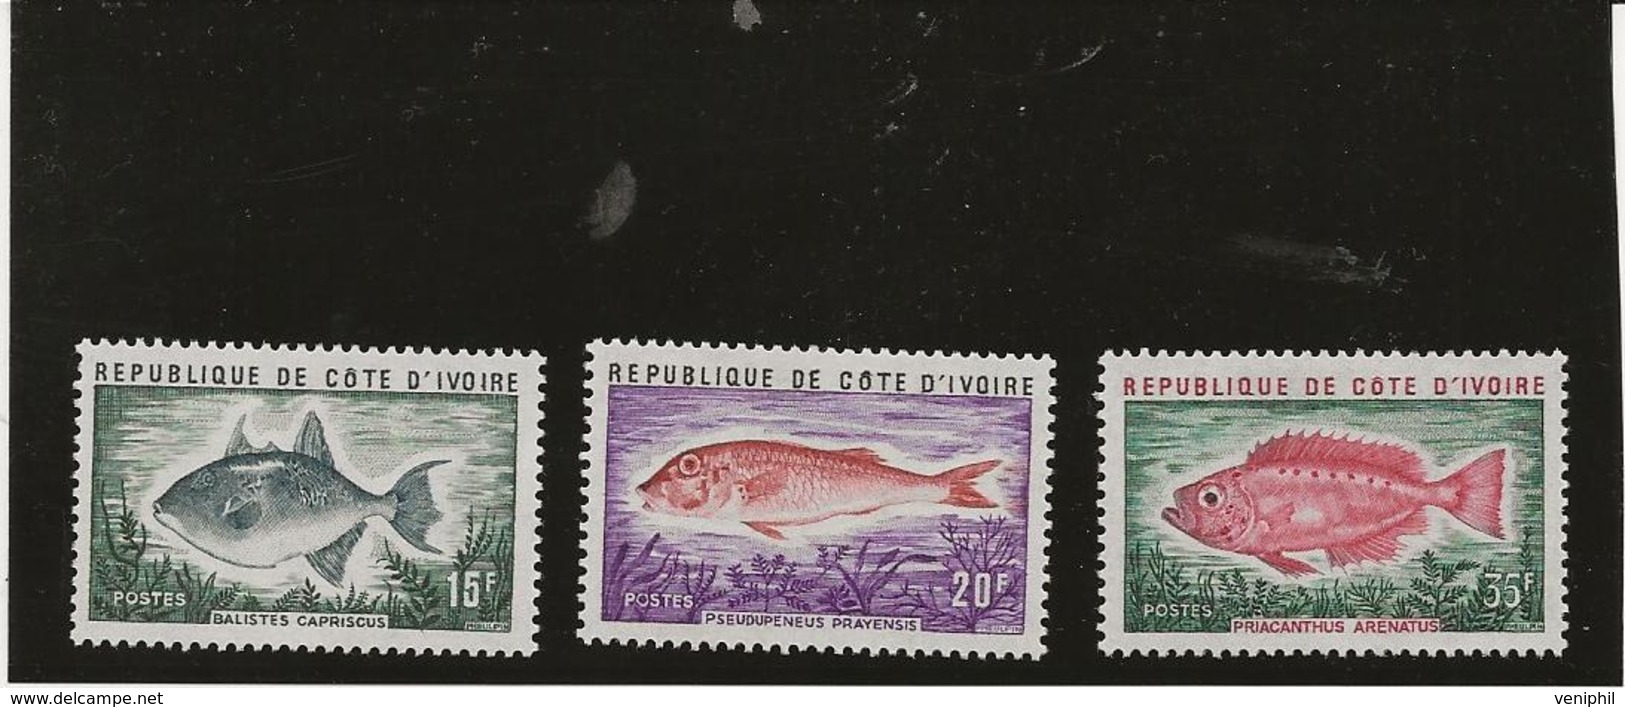 COTE D'IVOIRE - SERIE POISSONS N° 354 A 356 NEUF INFIME CHARNIERE - ANNEE 1973 -COTE : 10 € - Ivory Coast (1960-...)